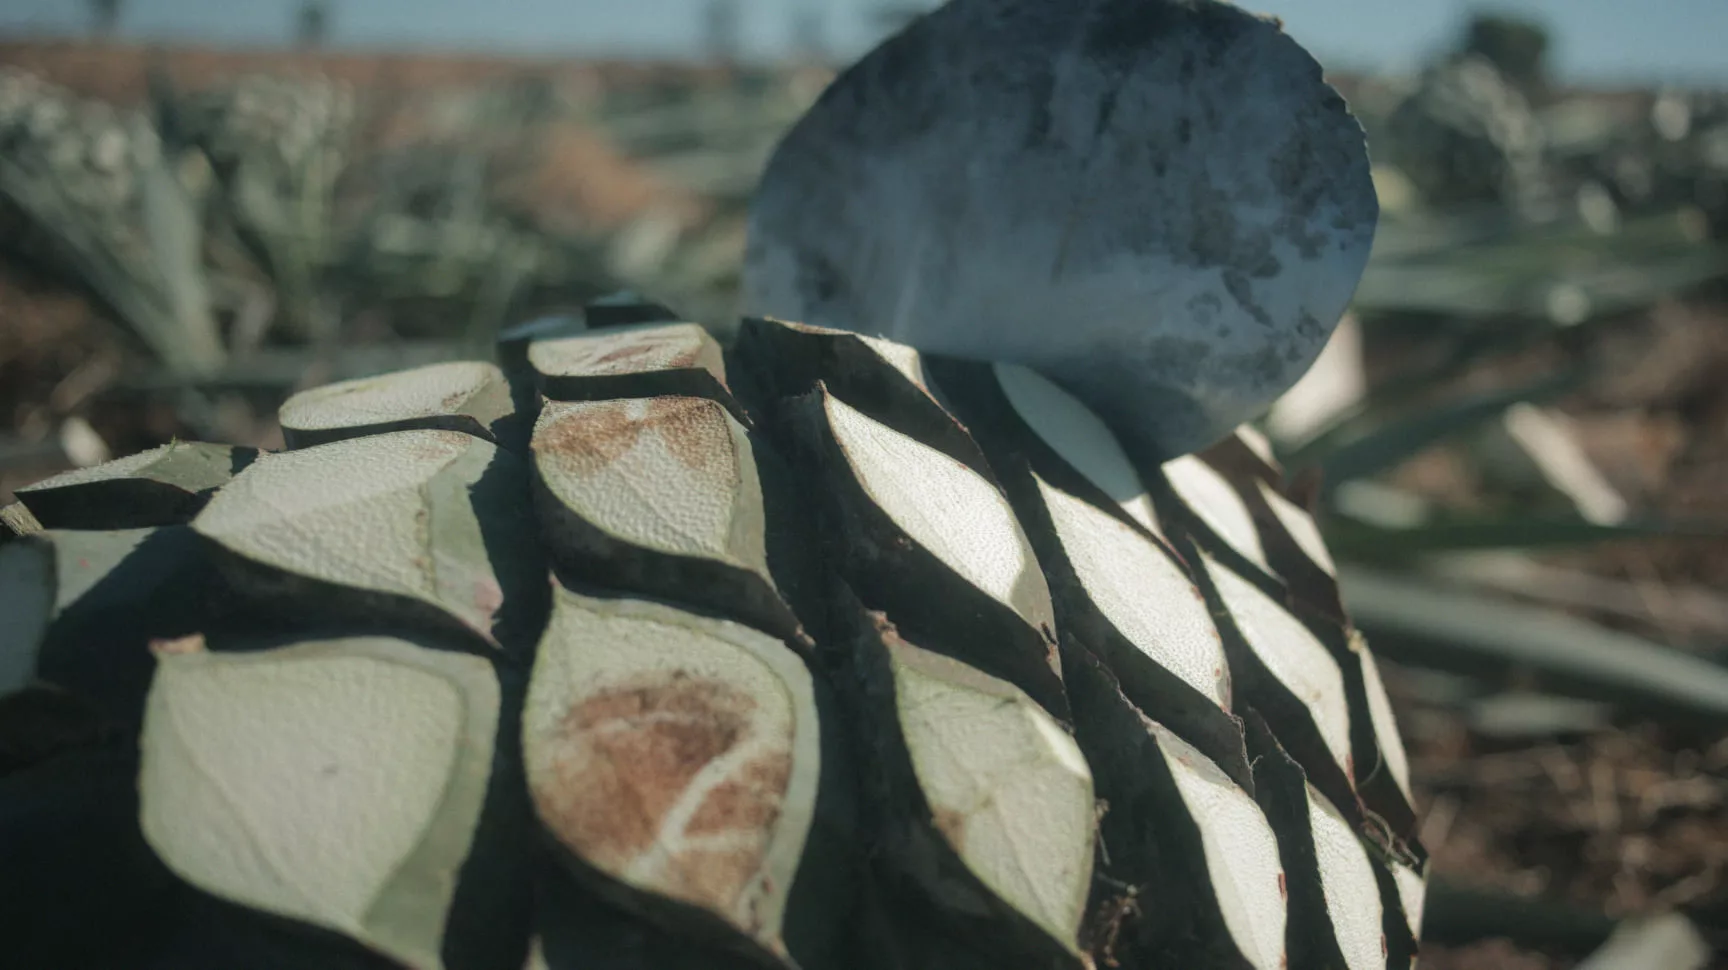 Agave plantations producing tequila for nice bottle of Celosa